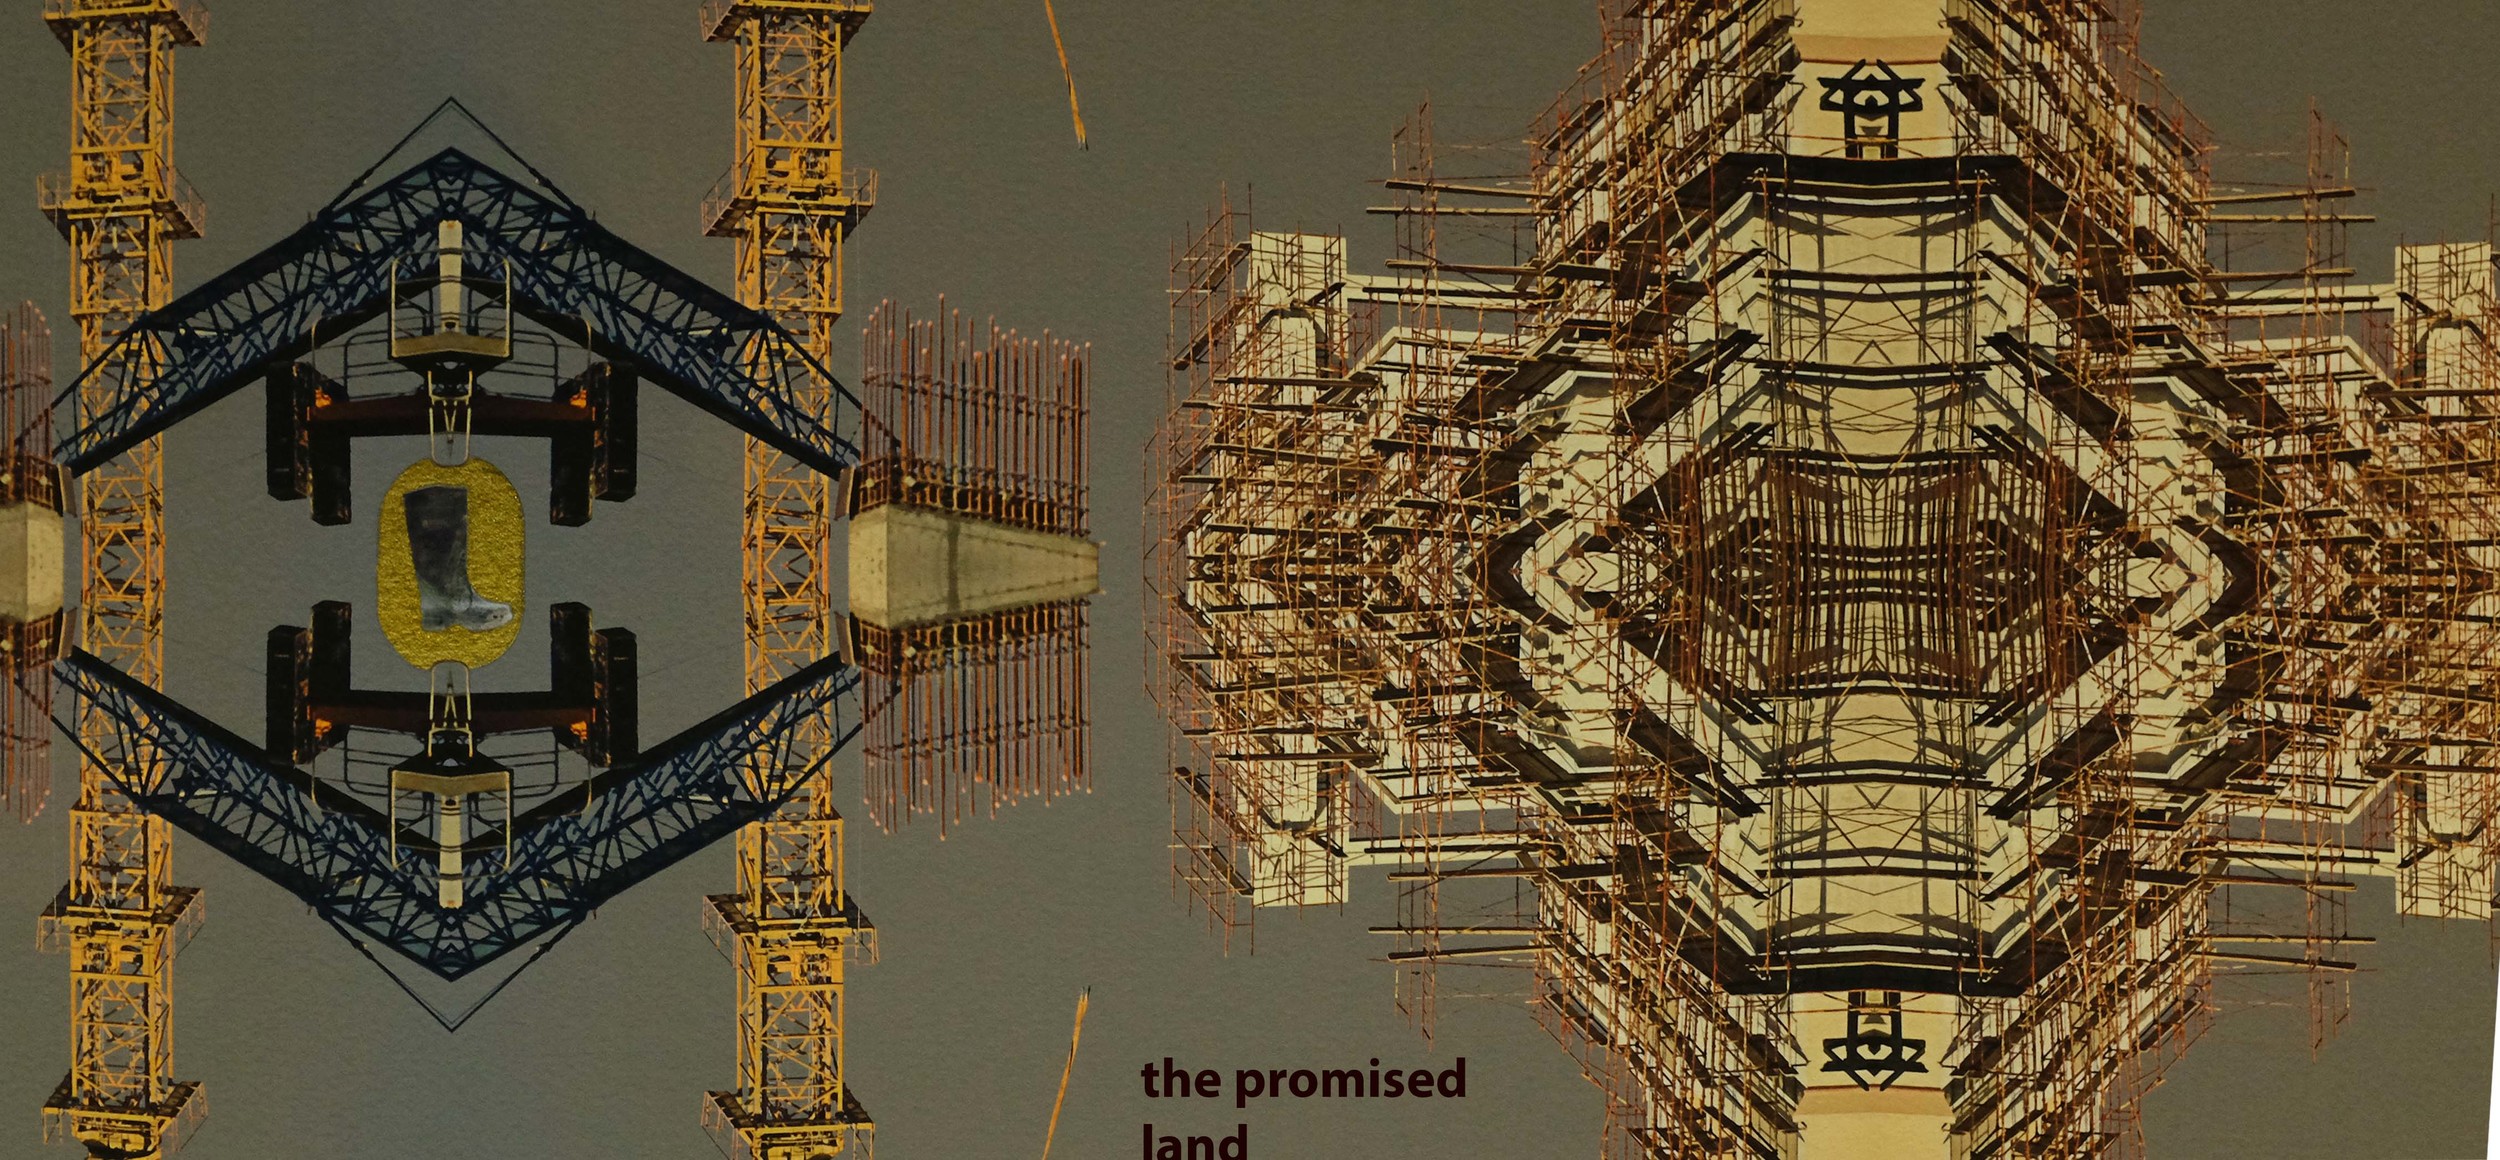  ‘The Promised land’ had me narrating themes in the context of the UAE, exploring the visual landscape built every day by an expatriate labor class who will never occupy what they create, a vital yet voiceless sector of society.  &nbsp;To create this